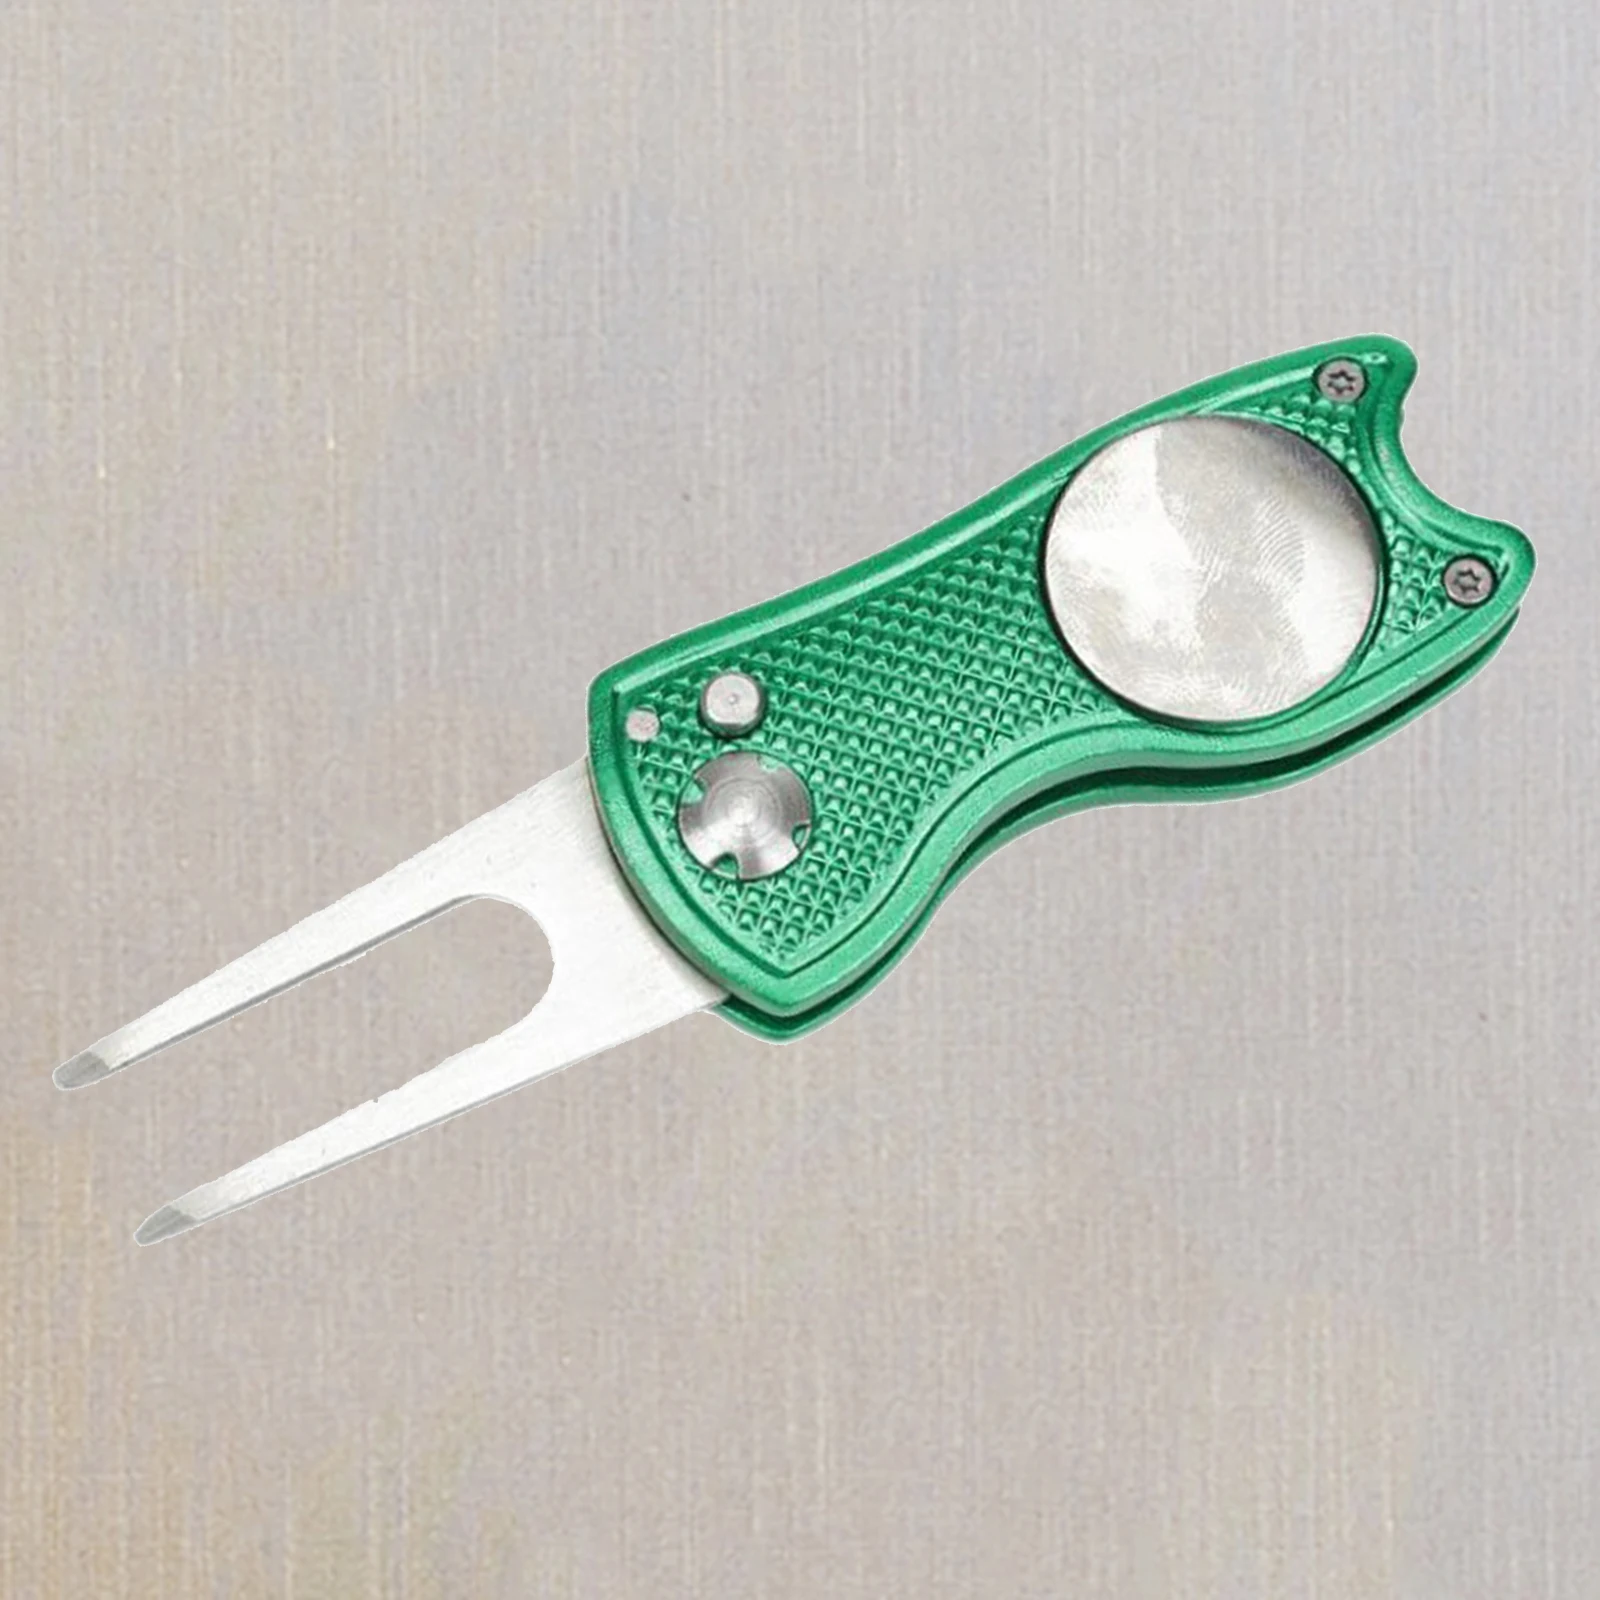 Portable Metal Golf Divot Tool with -up Button Ball Marker Pitch Groove